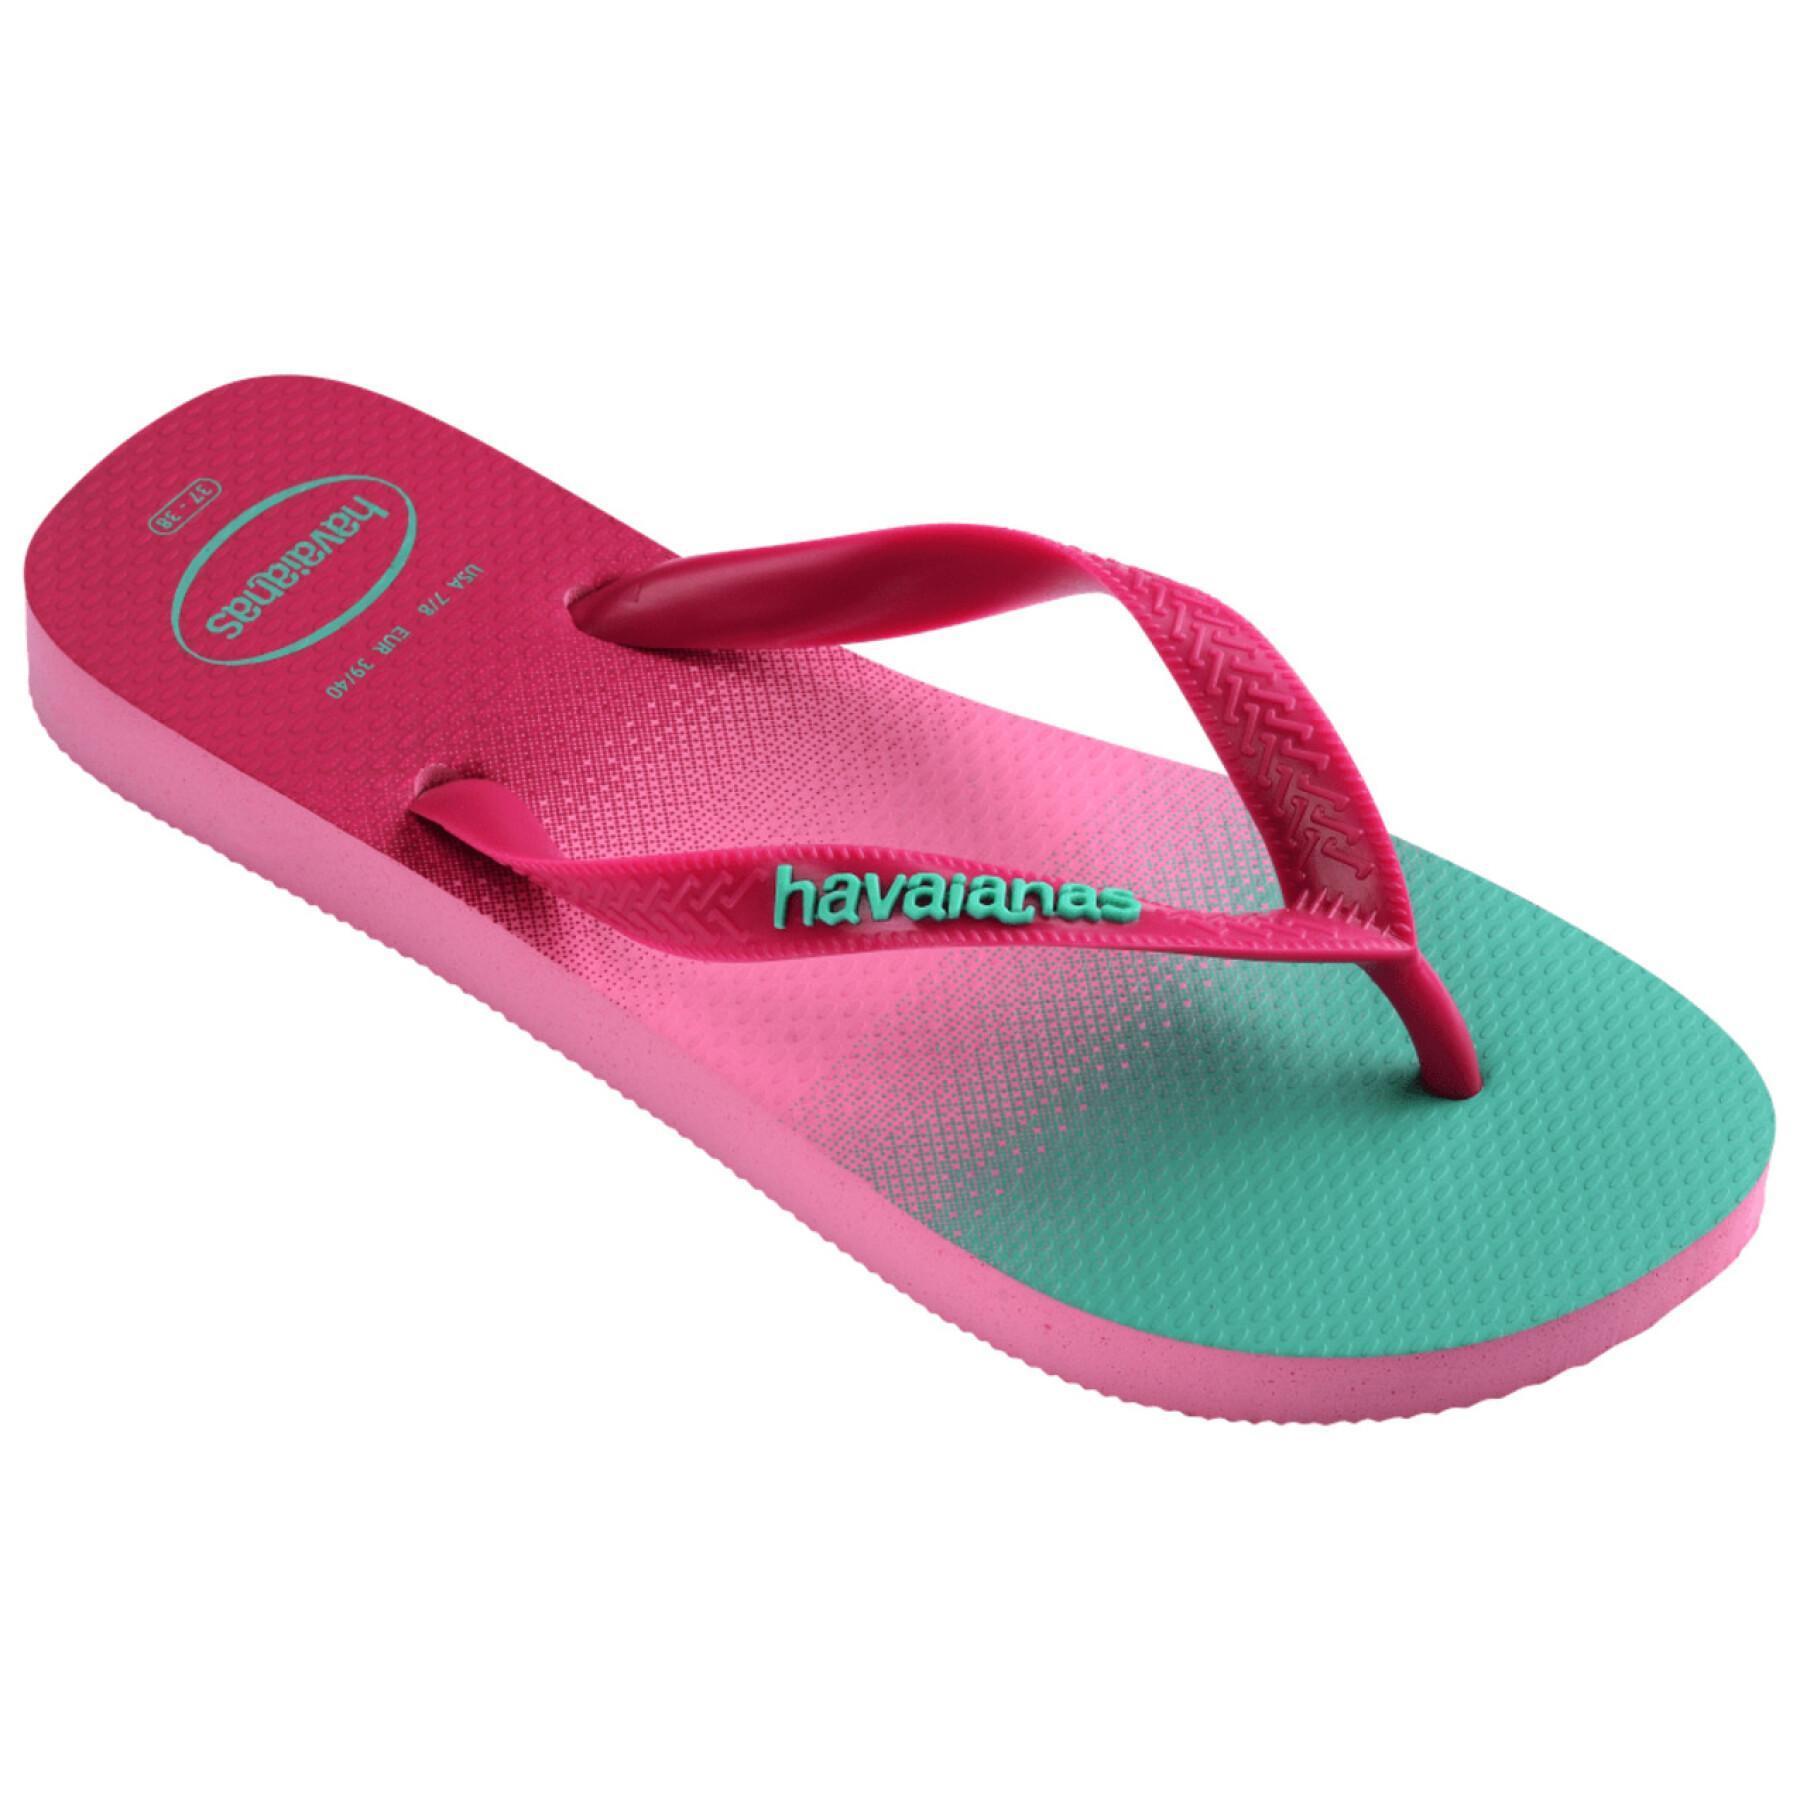 Vrouwenslippers Havaianas Top Fashion